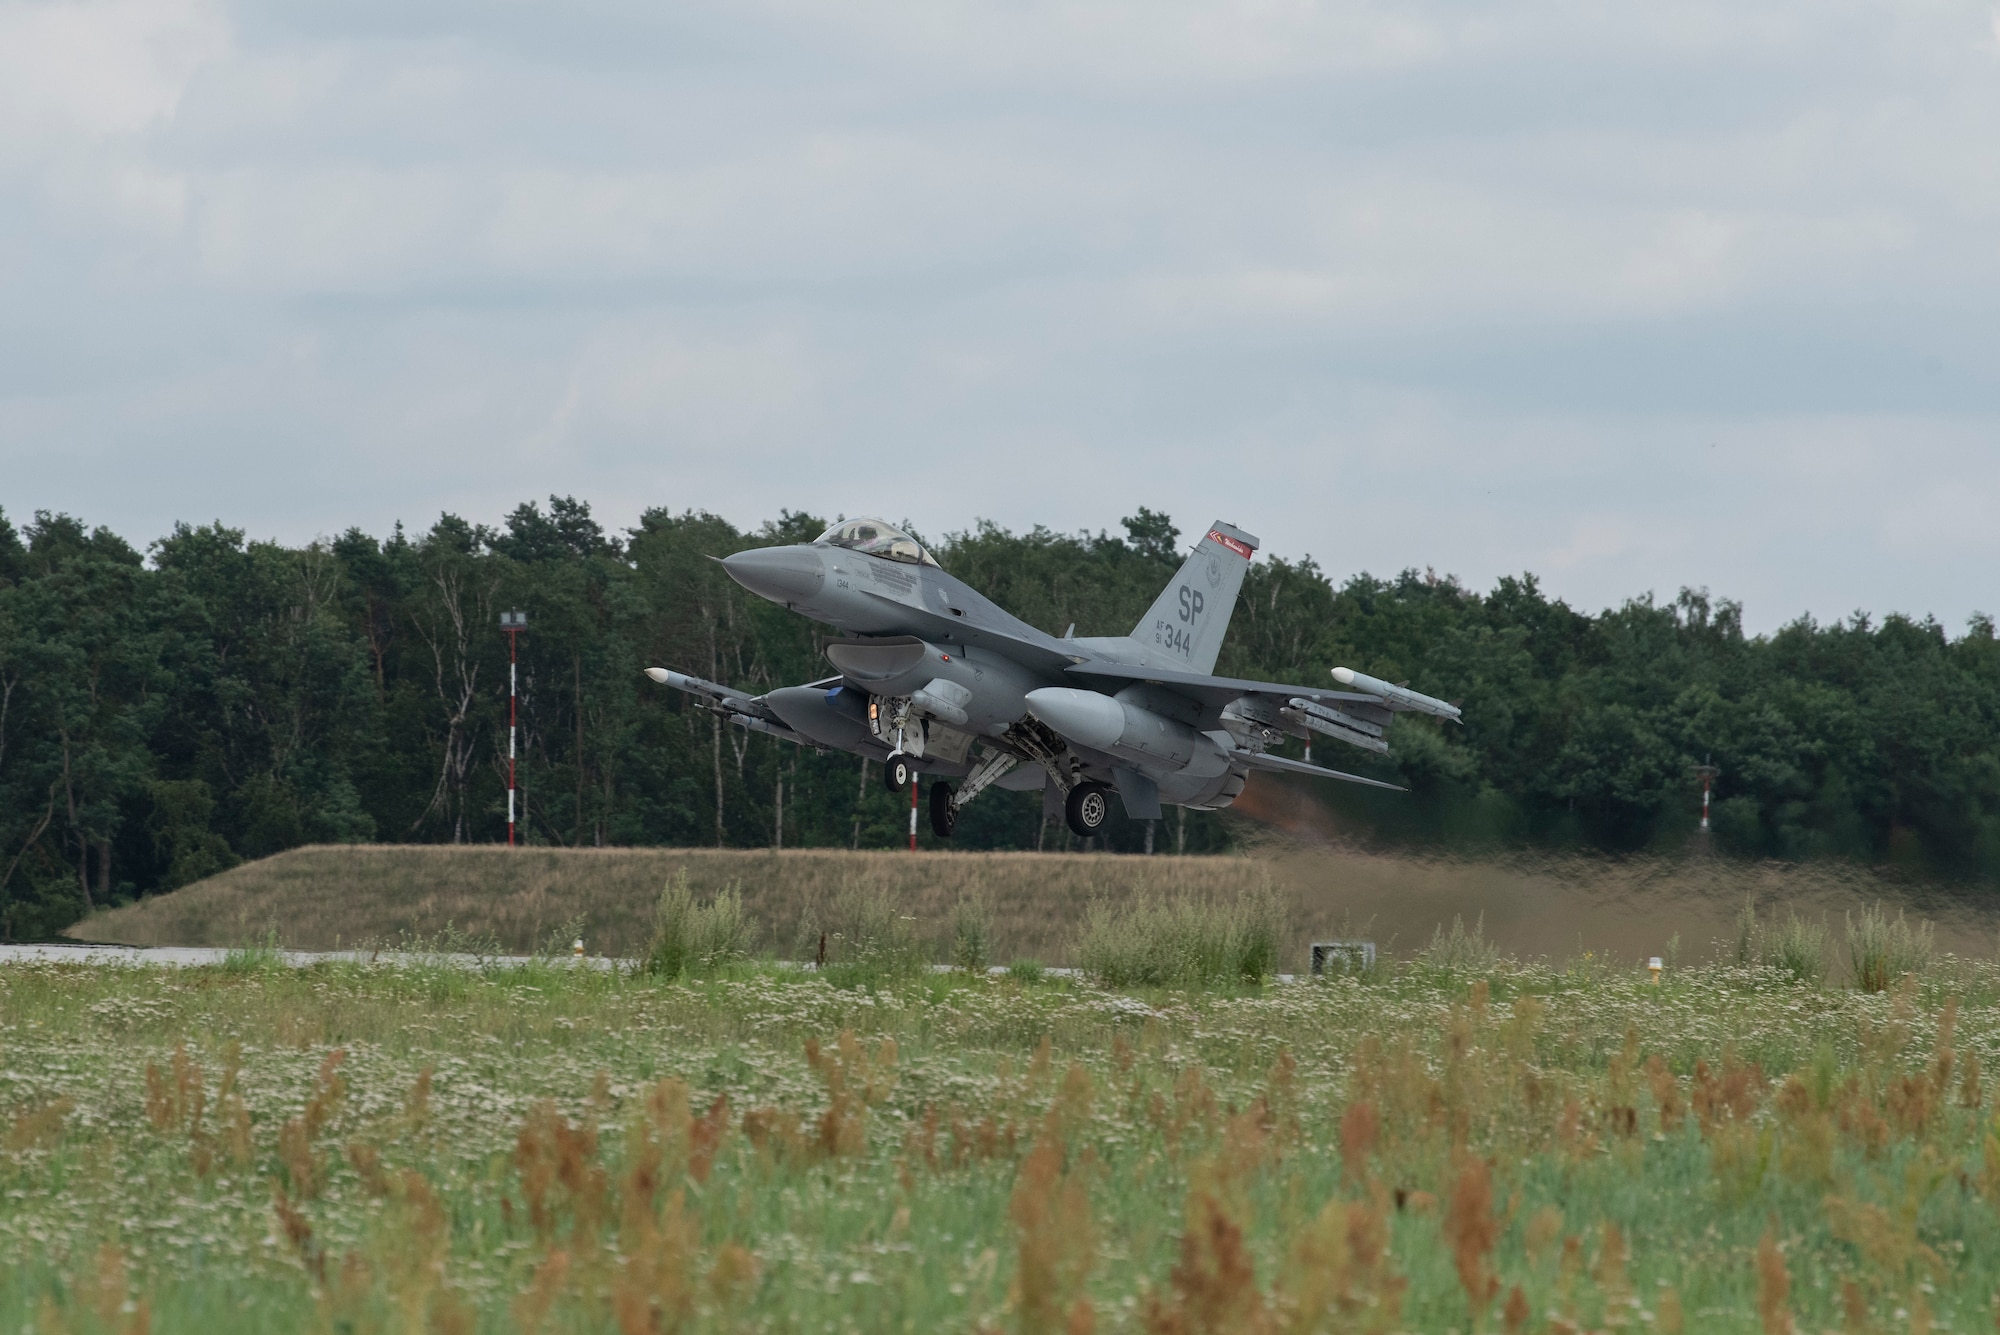 A U.S. Air Force F-16 Fighting Falcon assigned to the 480th Expeditionary Fighter Squadron takes off at Łask Air Base, Poland, August 2, 2021. The 480th EFS is participating in bilateral training with the Polish air force in support of Operation Atlantic Resolve. (U.S. Air Force photo by Tech. Sgt. Anthony Plyler)